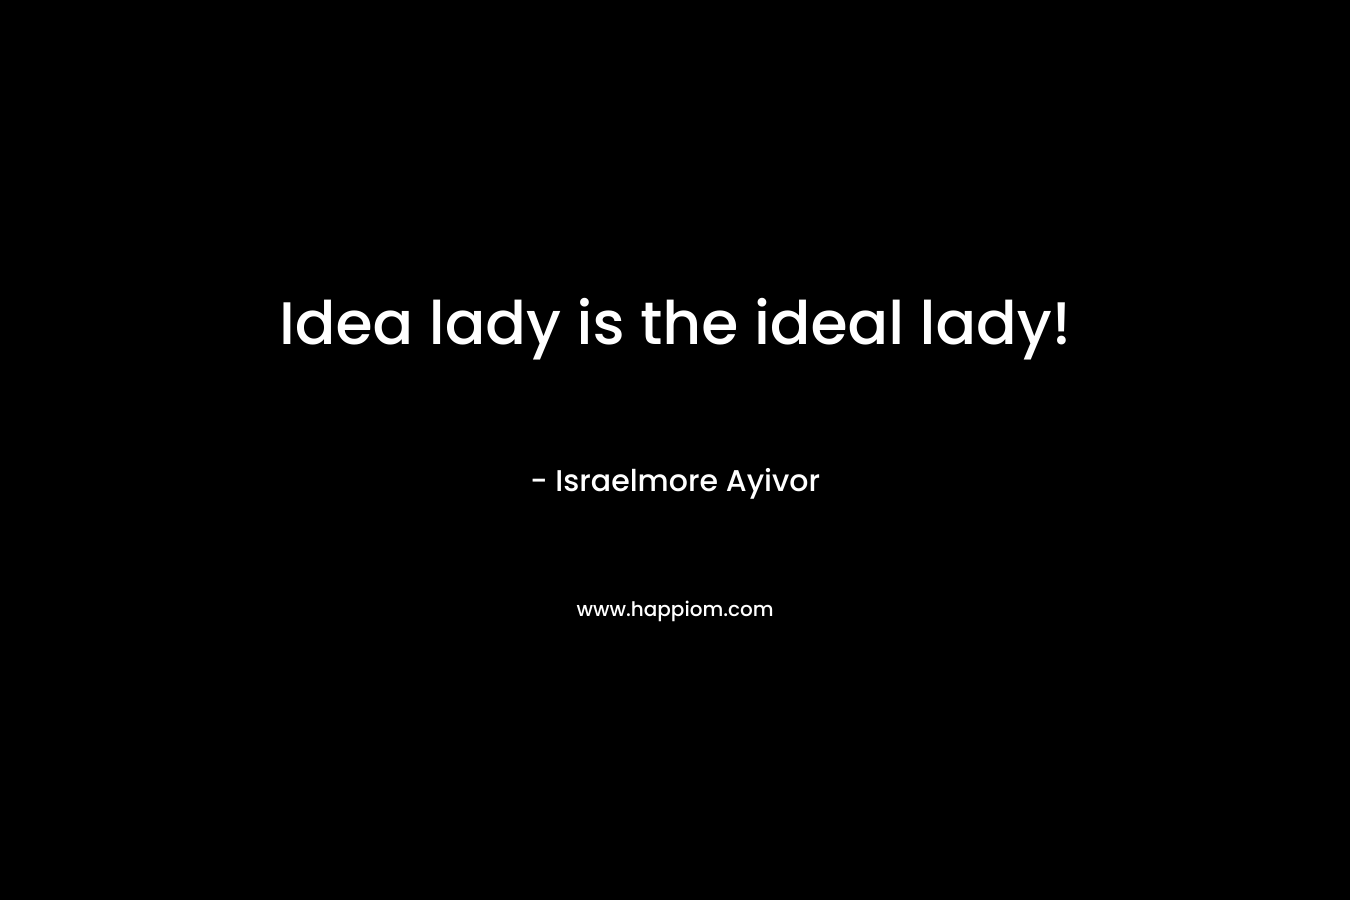 Idea lady is the ideal lady!